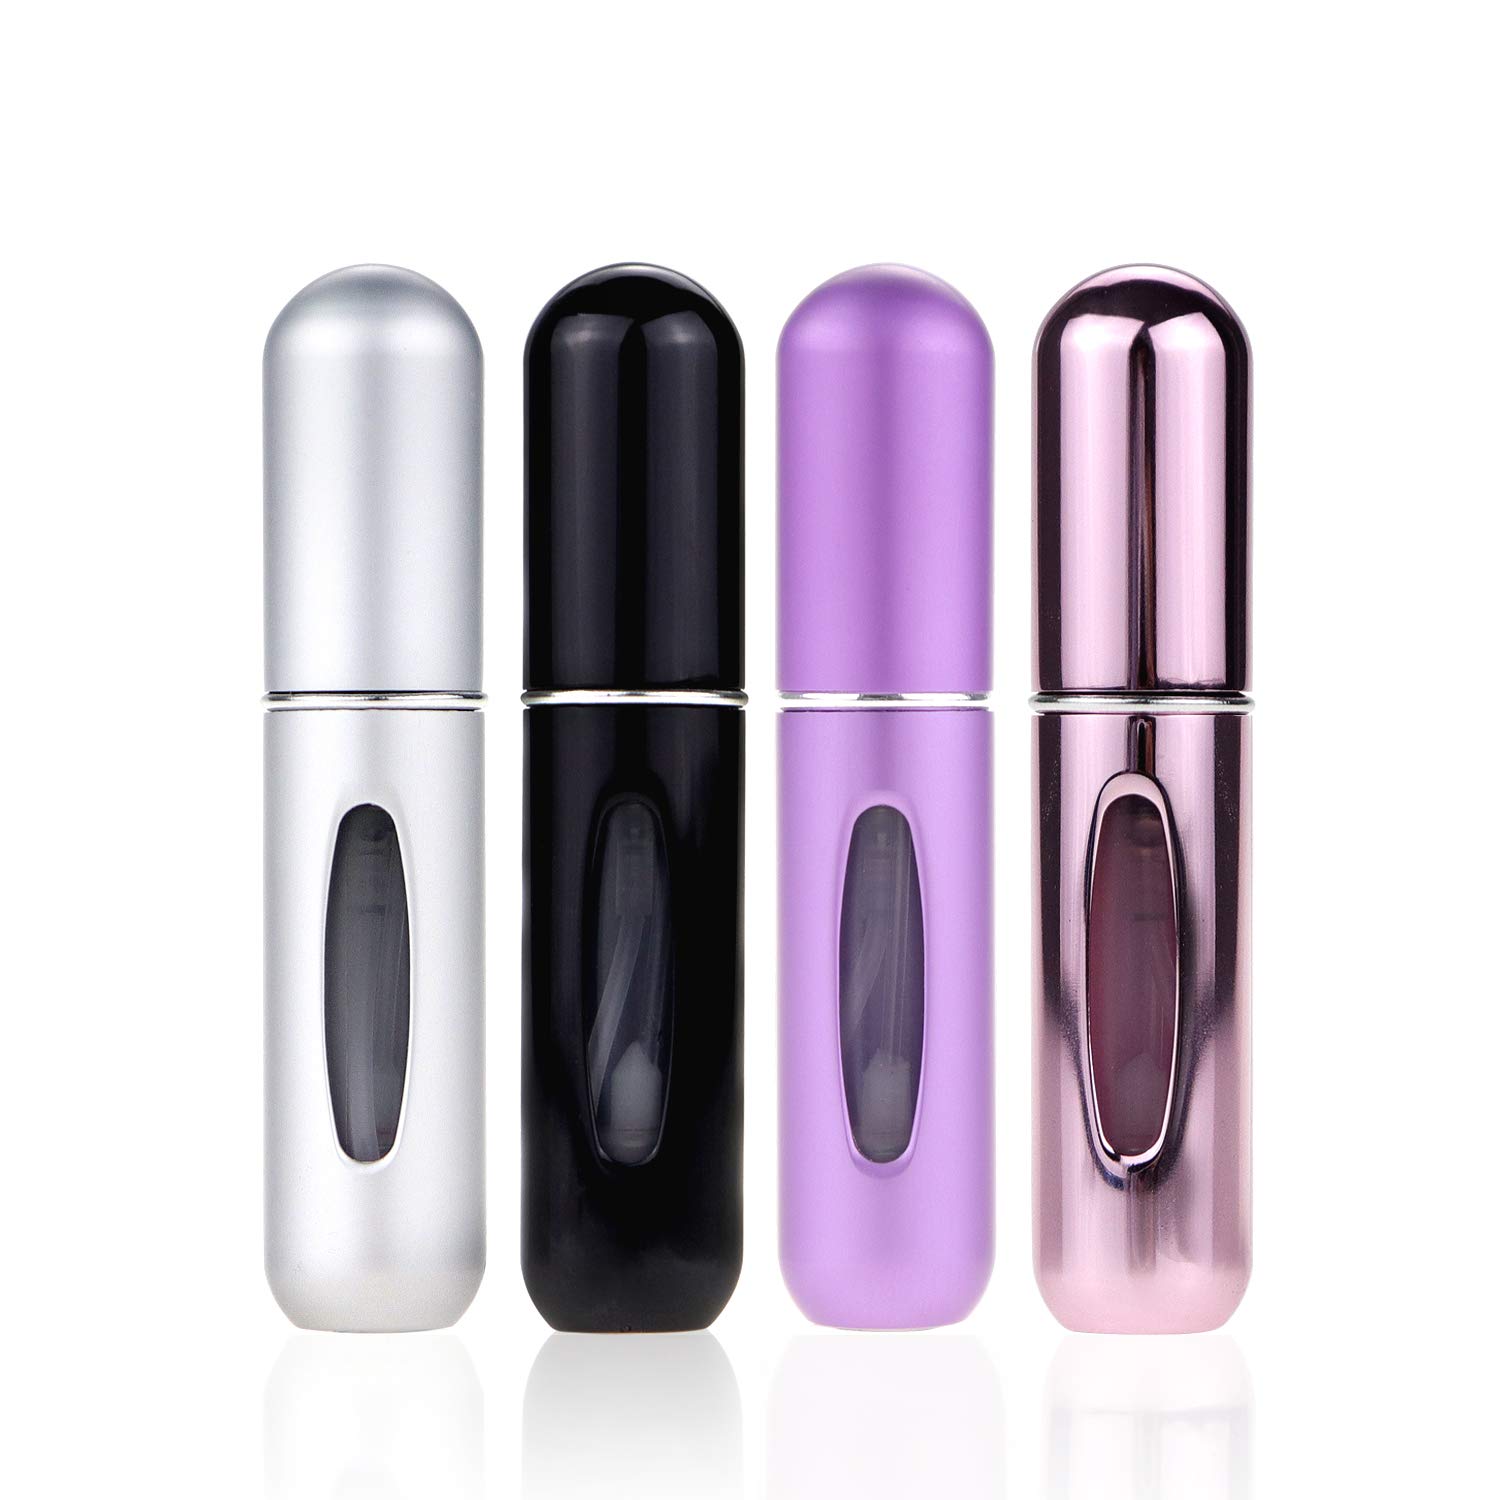 travel refillable perfume atomisers